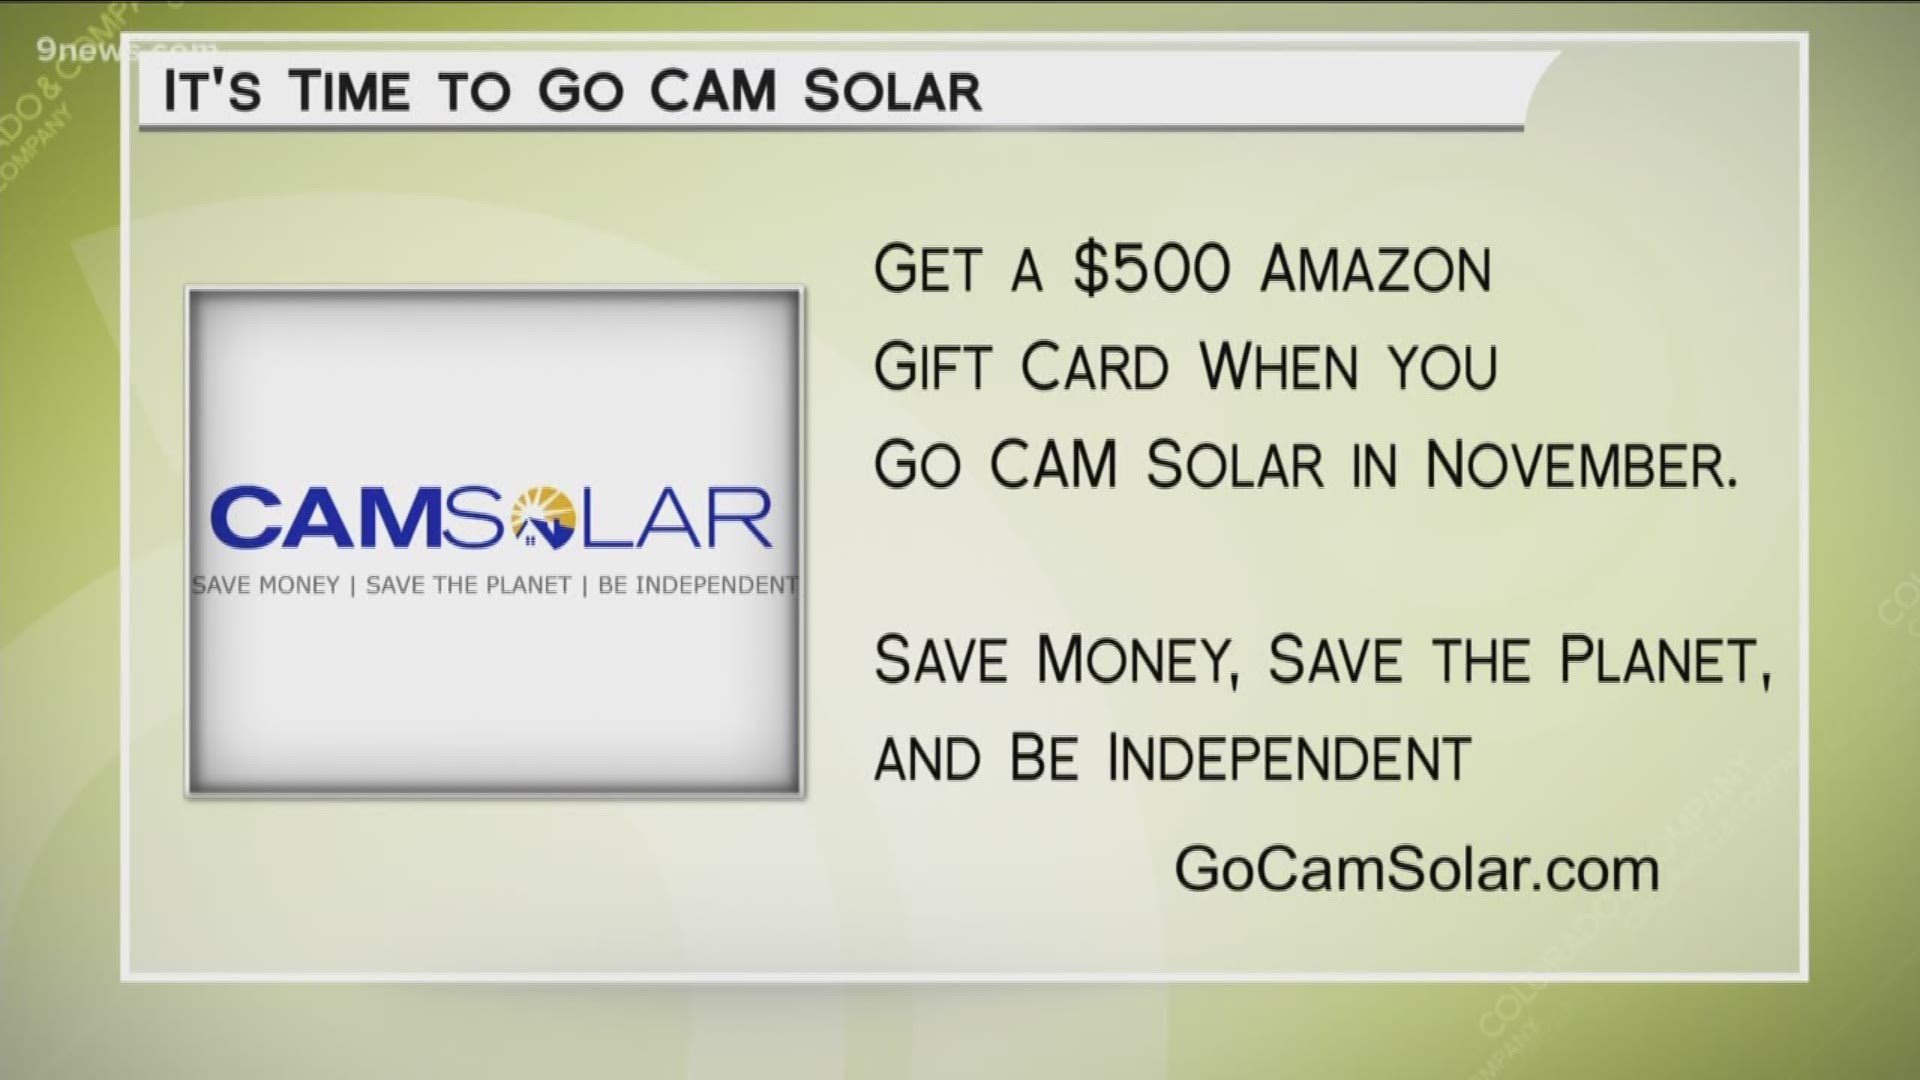 COCO viewers can get a $500 Amazon gift card for signing up in November from CAM Solar. Learn more at GoCAMSolar.com or call 888.994.6226.